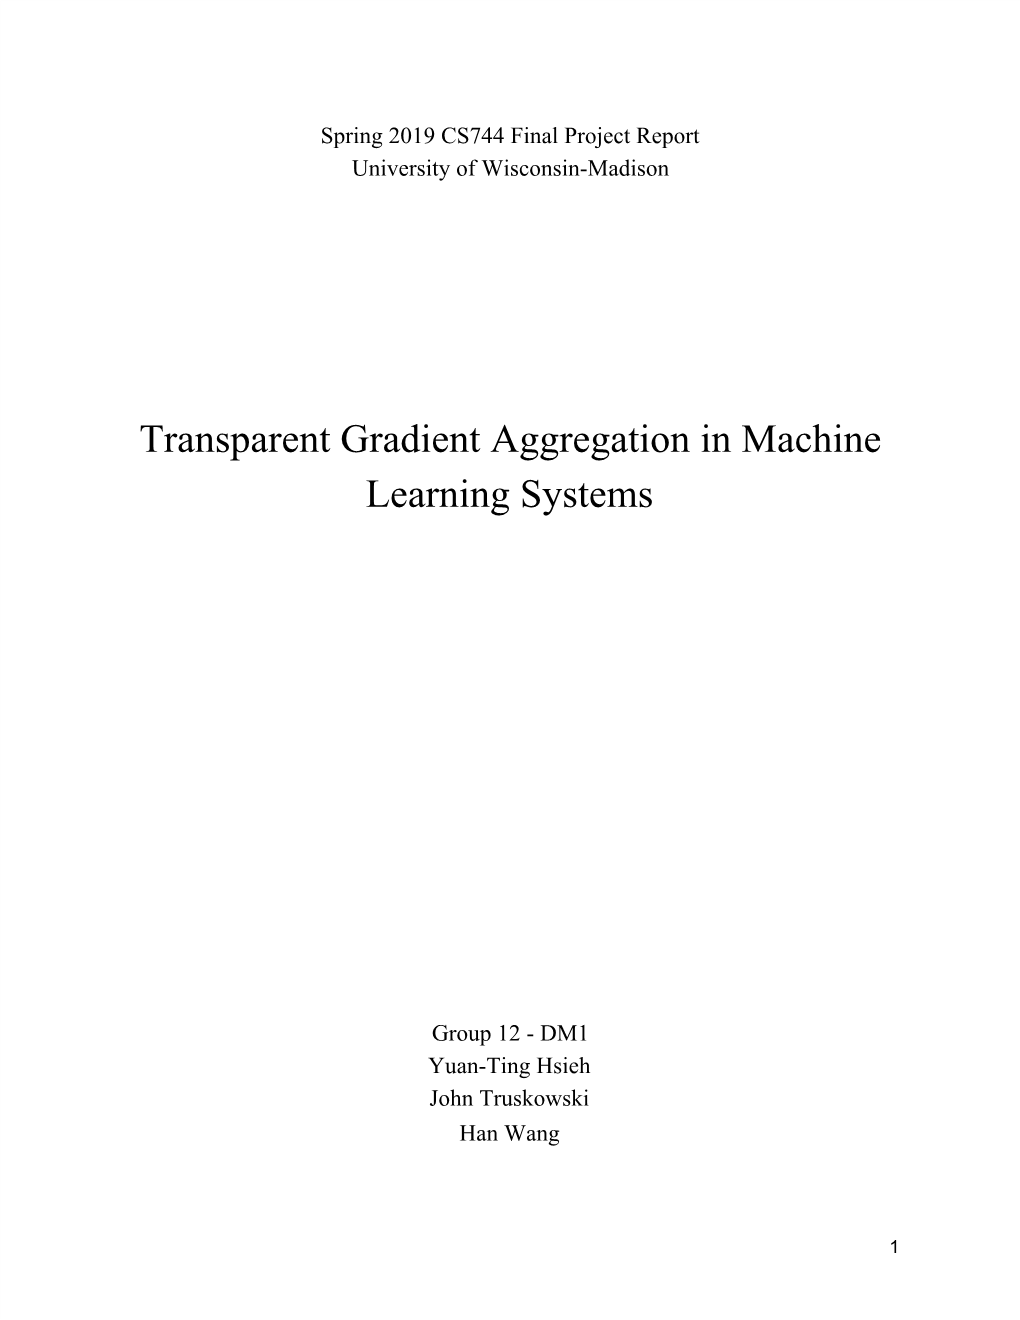 Transparent Gradient Aggregation in Machine Learning Systems